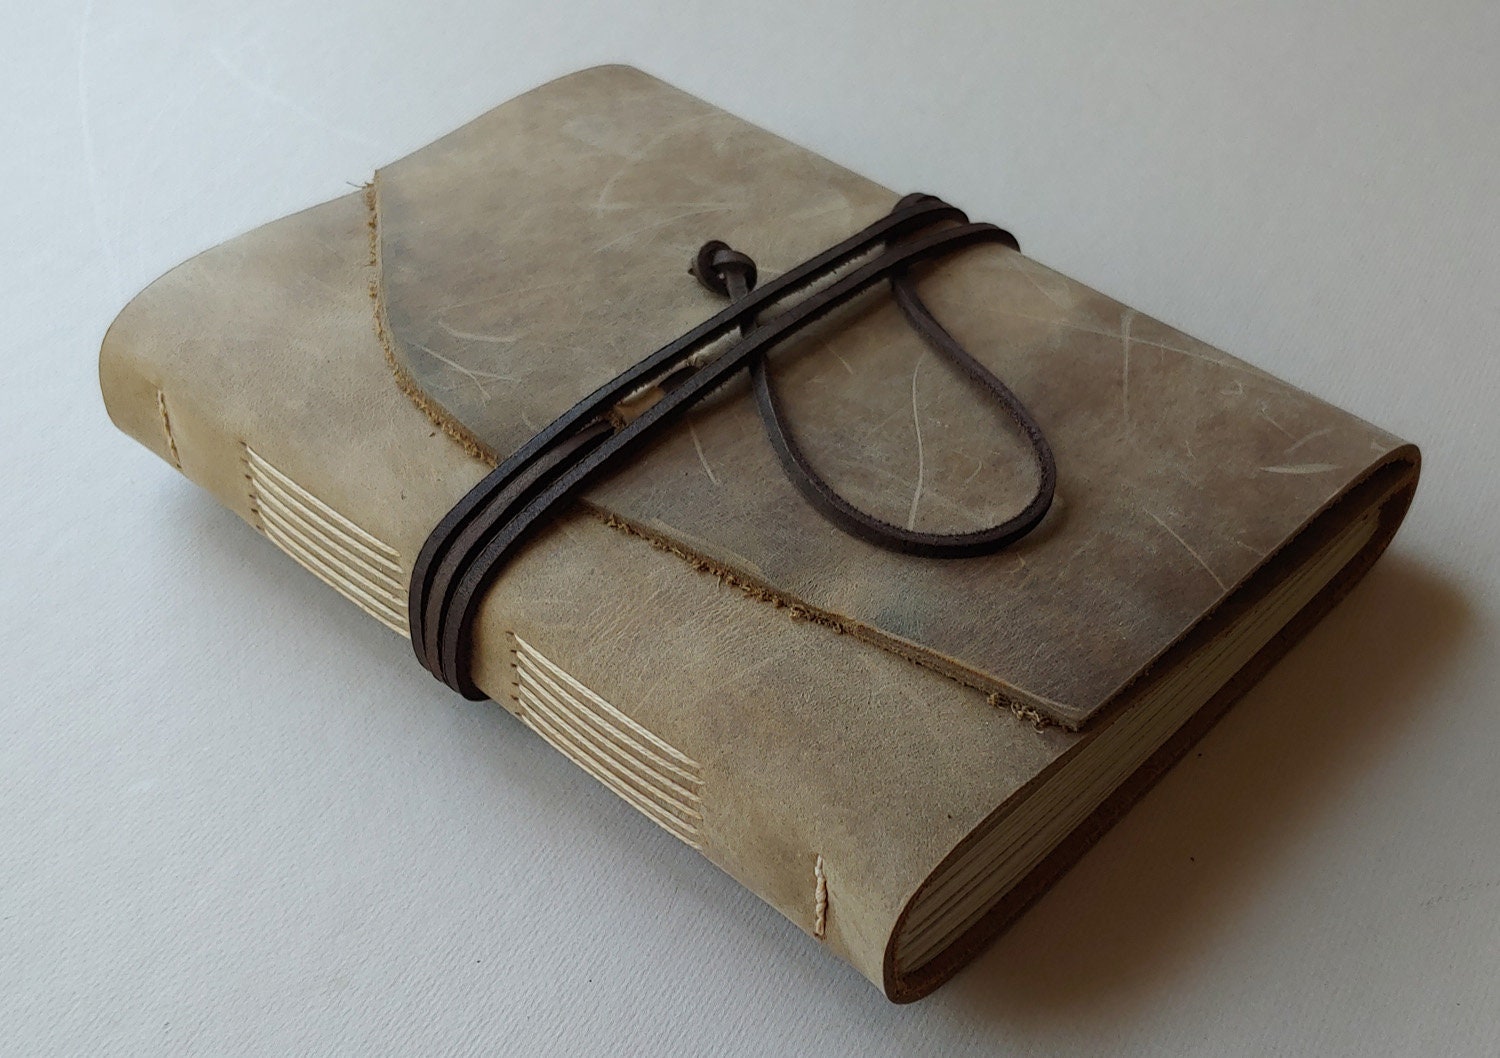 Rugged leather journal 5.5x 7.5 distressed tan | Etsy